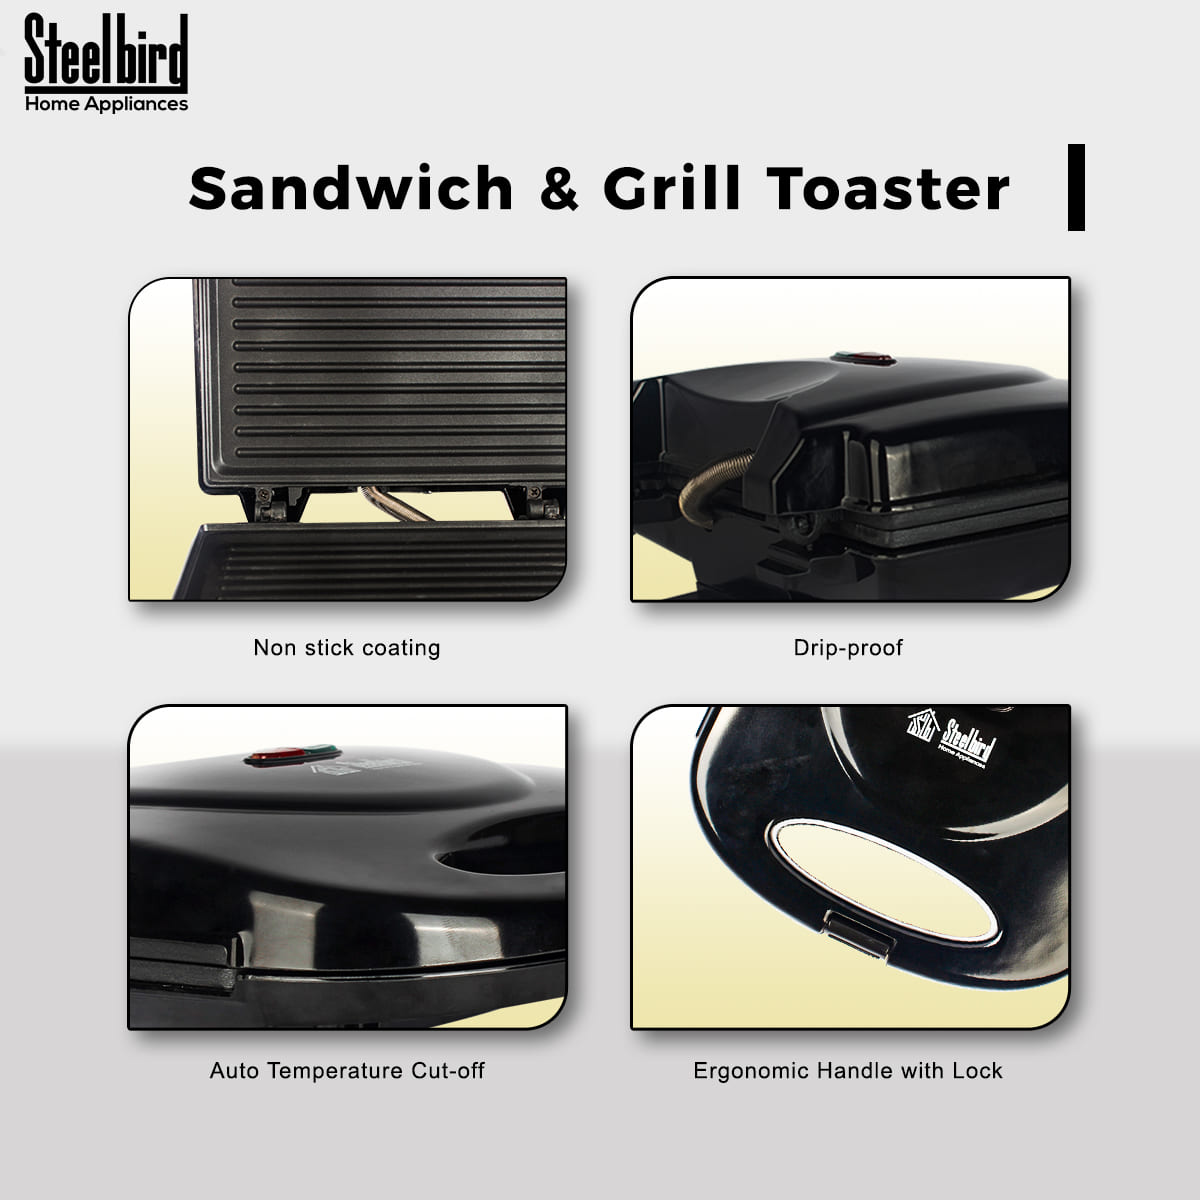 Steelbird Cyborg Toster Grill 750 Watt Grill Sandwich Maker With Non-Stick Coated Plates For Easy-to-Clean And Buckle Clips Lock (Black)